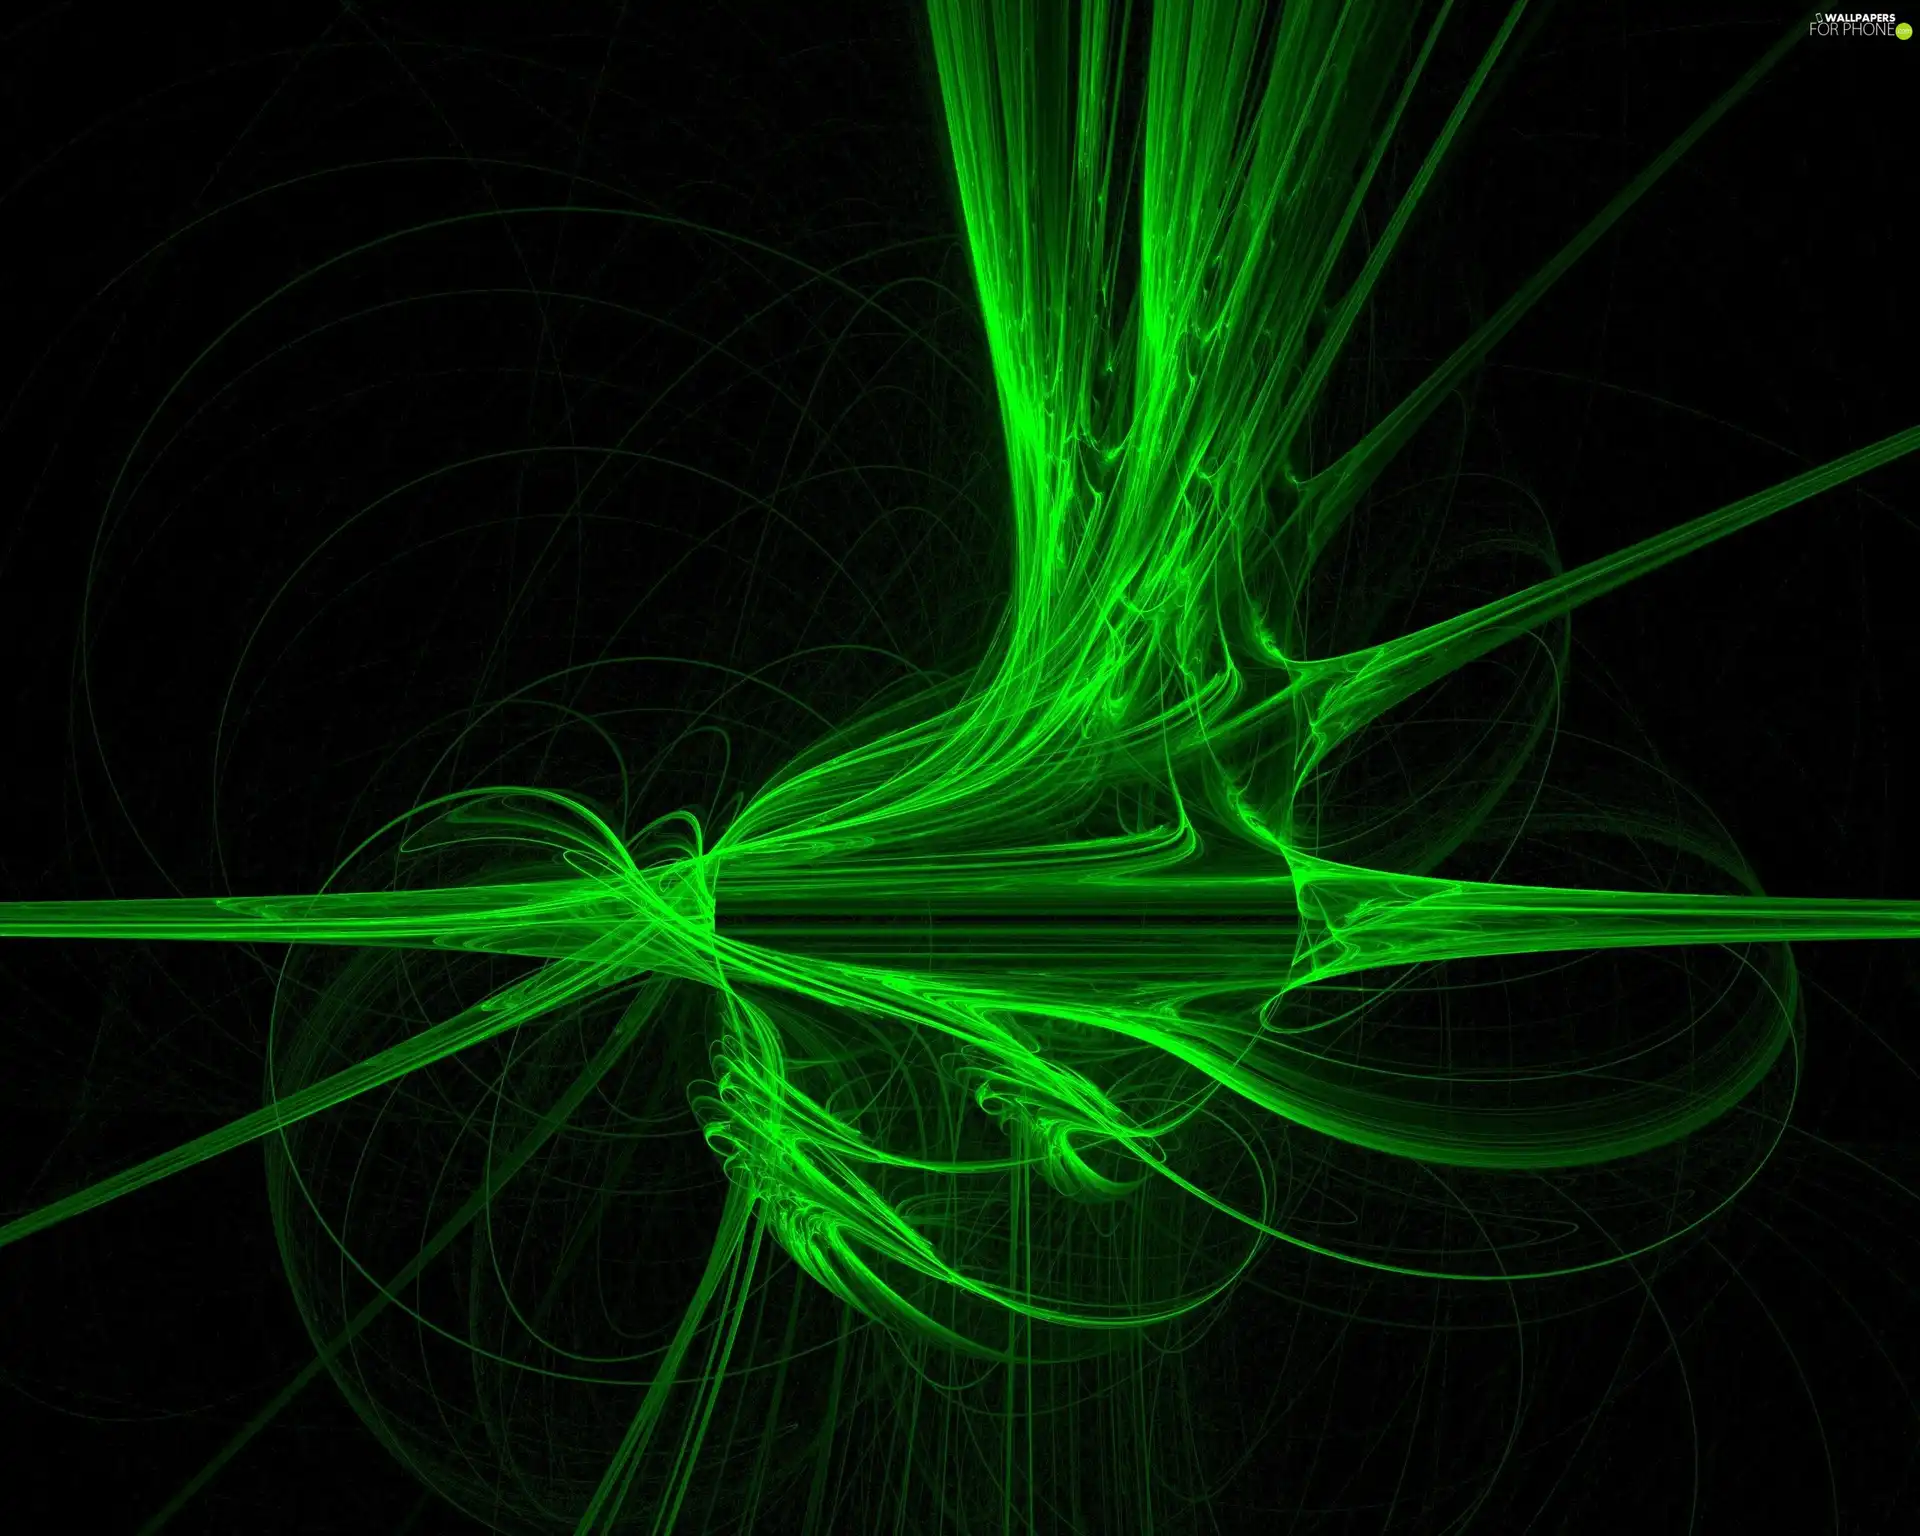 theme, Green, abstract